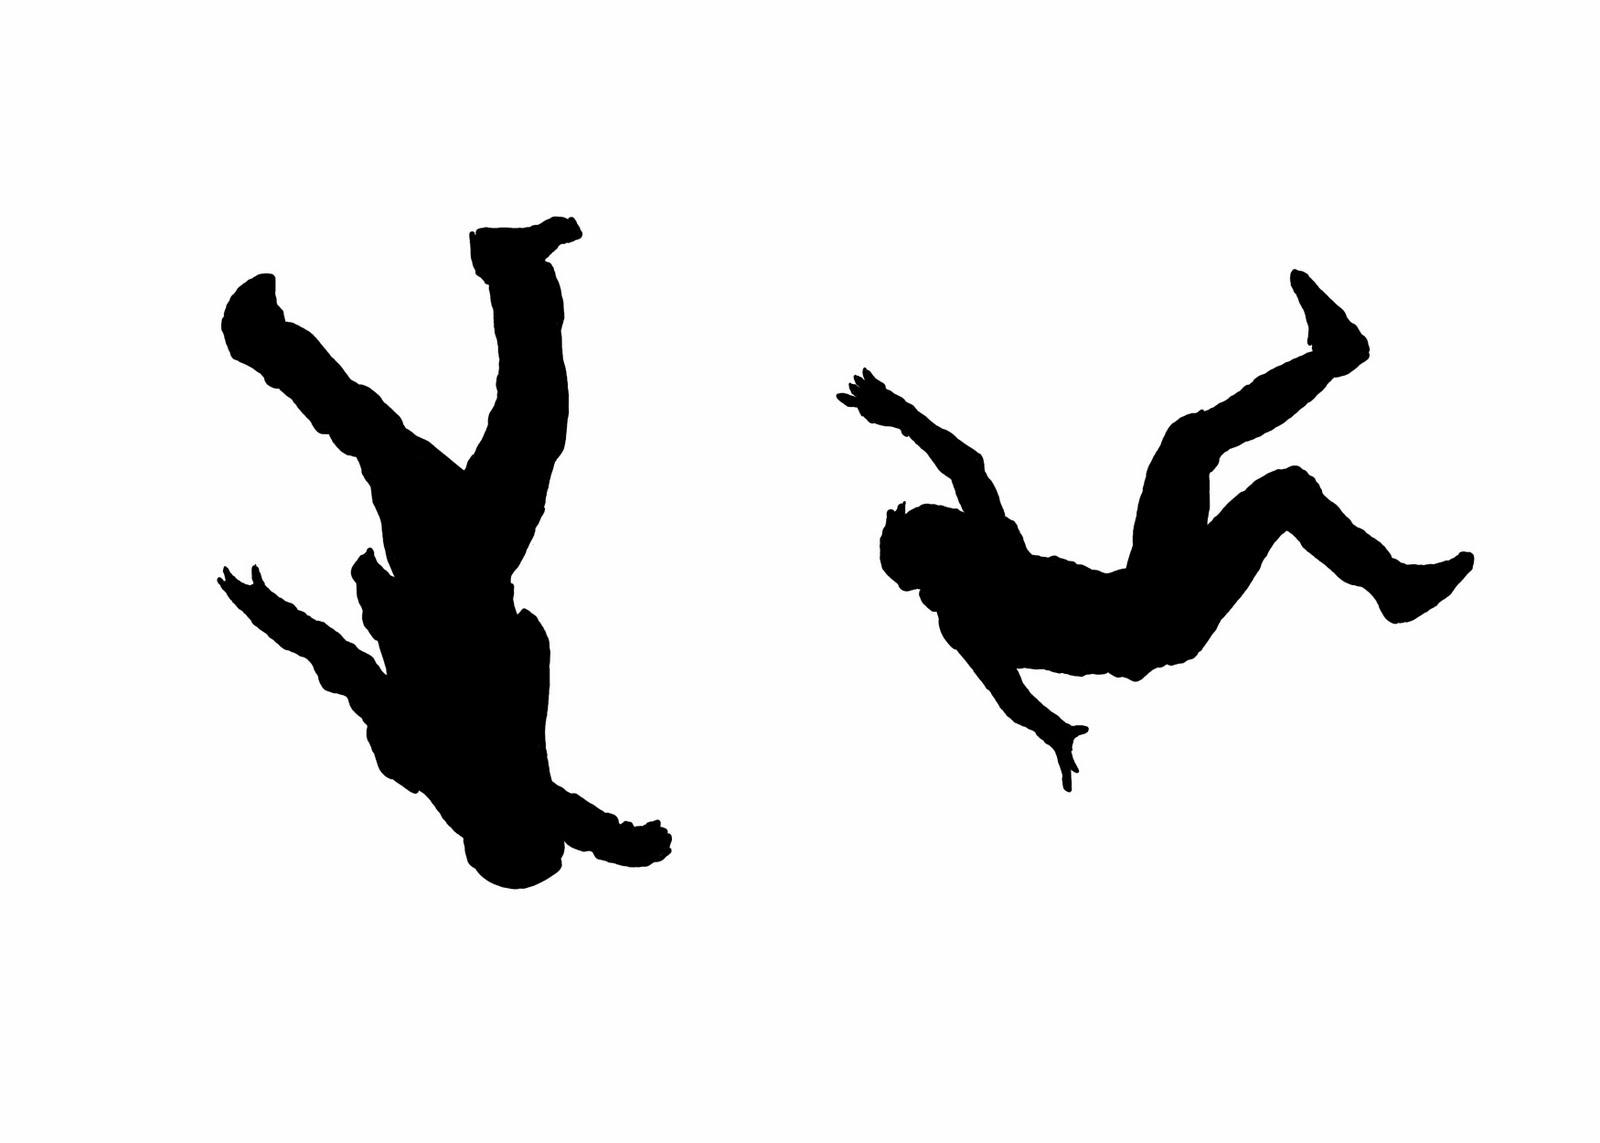 person falling from sky clipart